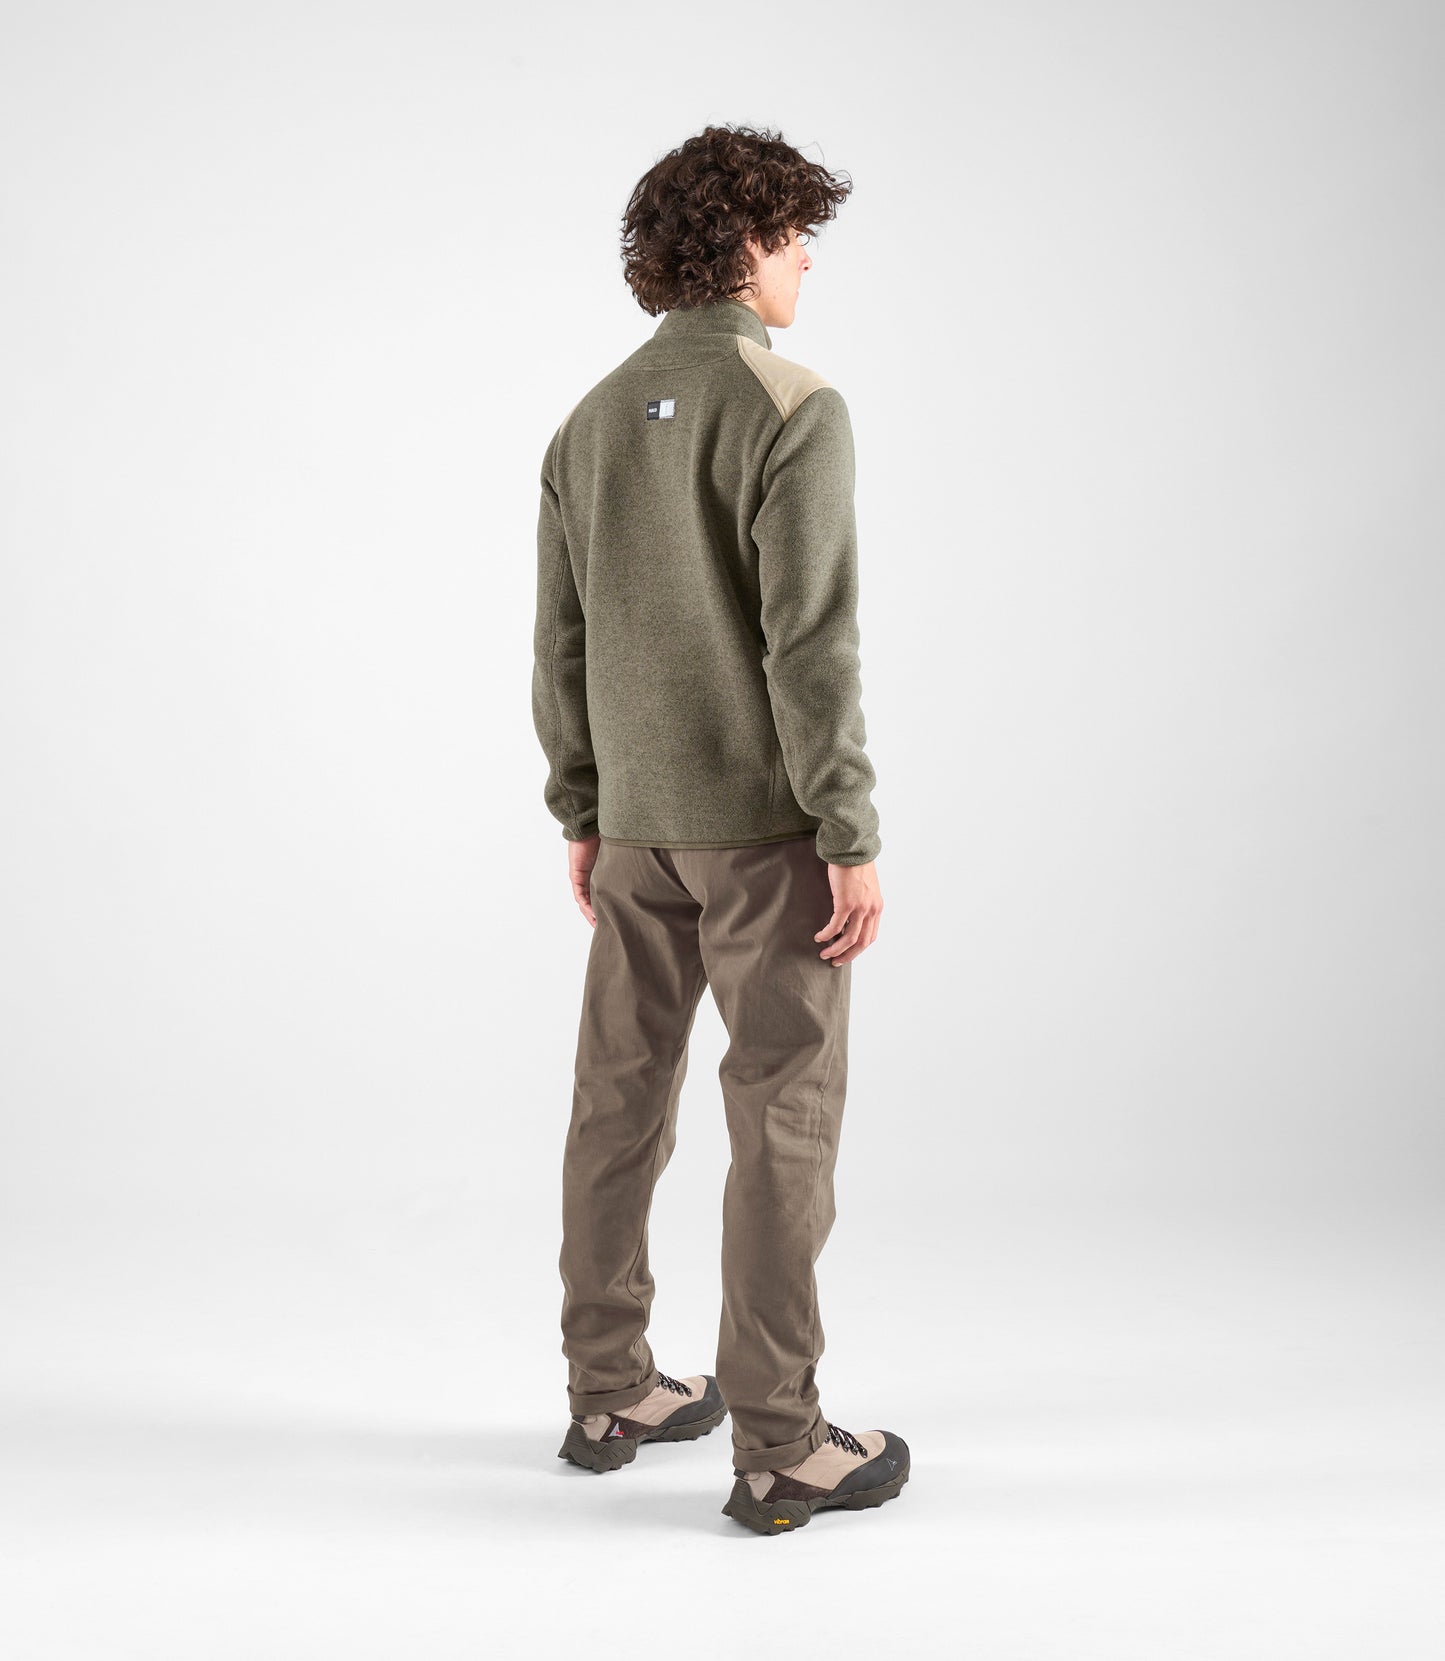 24WCCUR11PE_5_men cycling chino green urban winter total body back pedaled